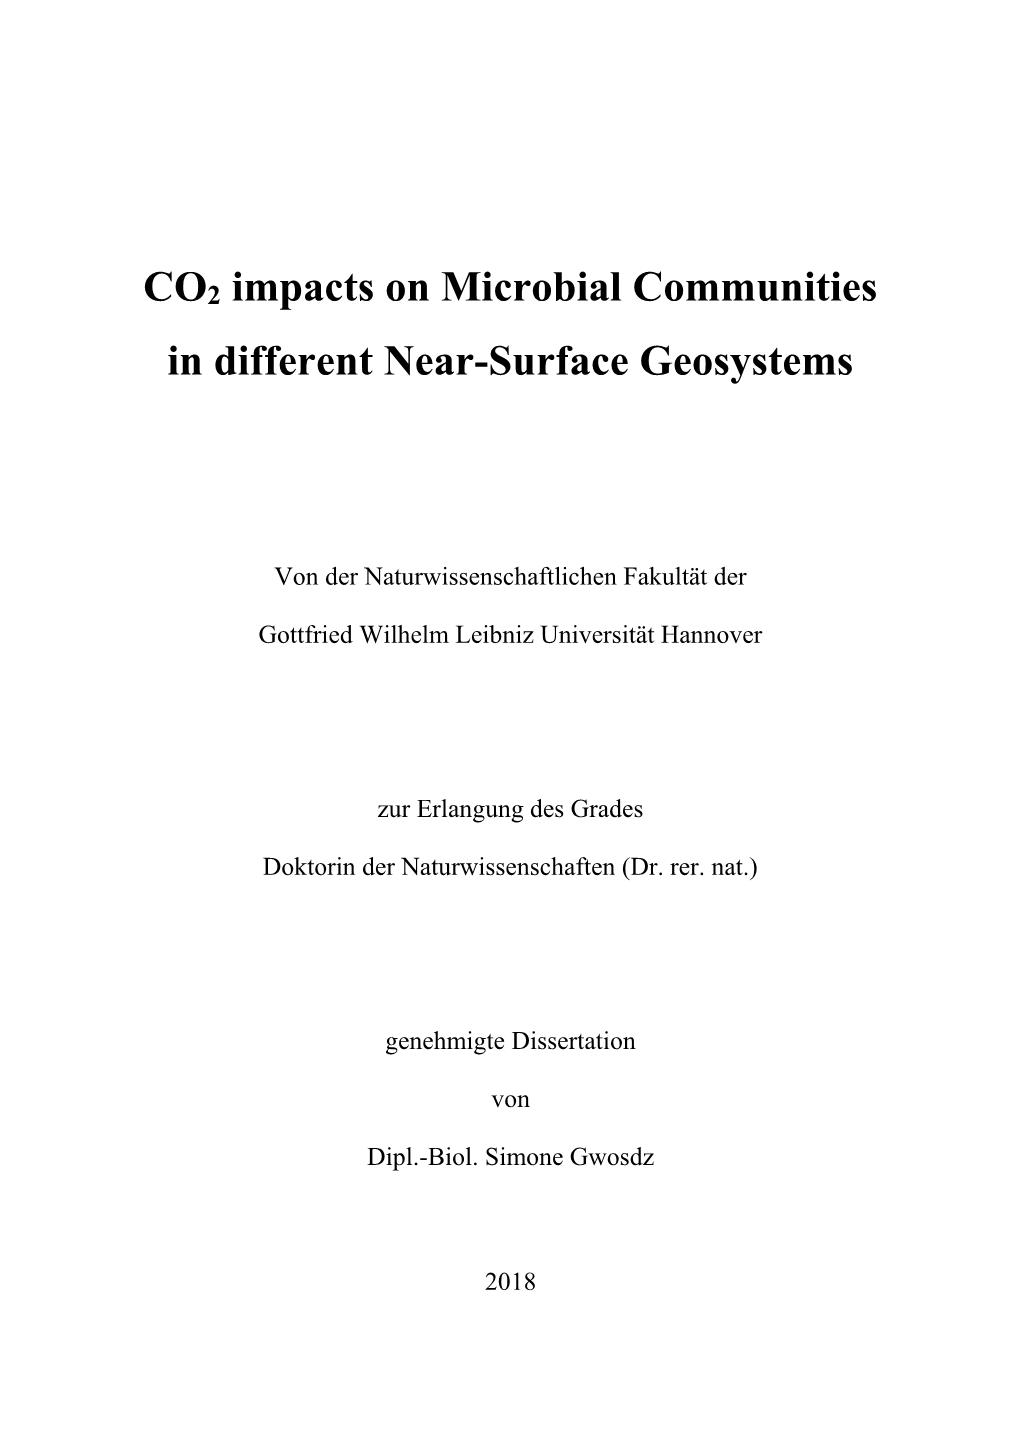 CO2 Impacts on Microbial Communities in Different Near-Surface Geosystems